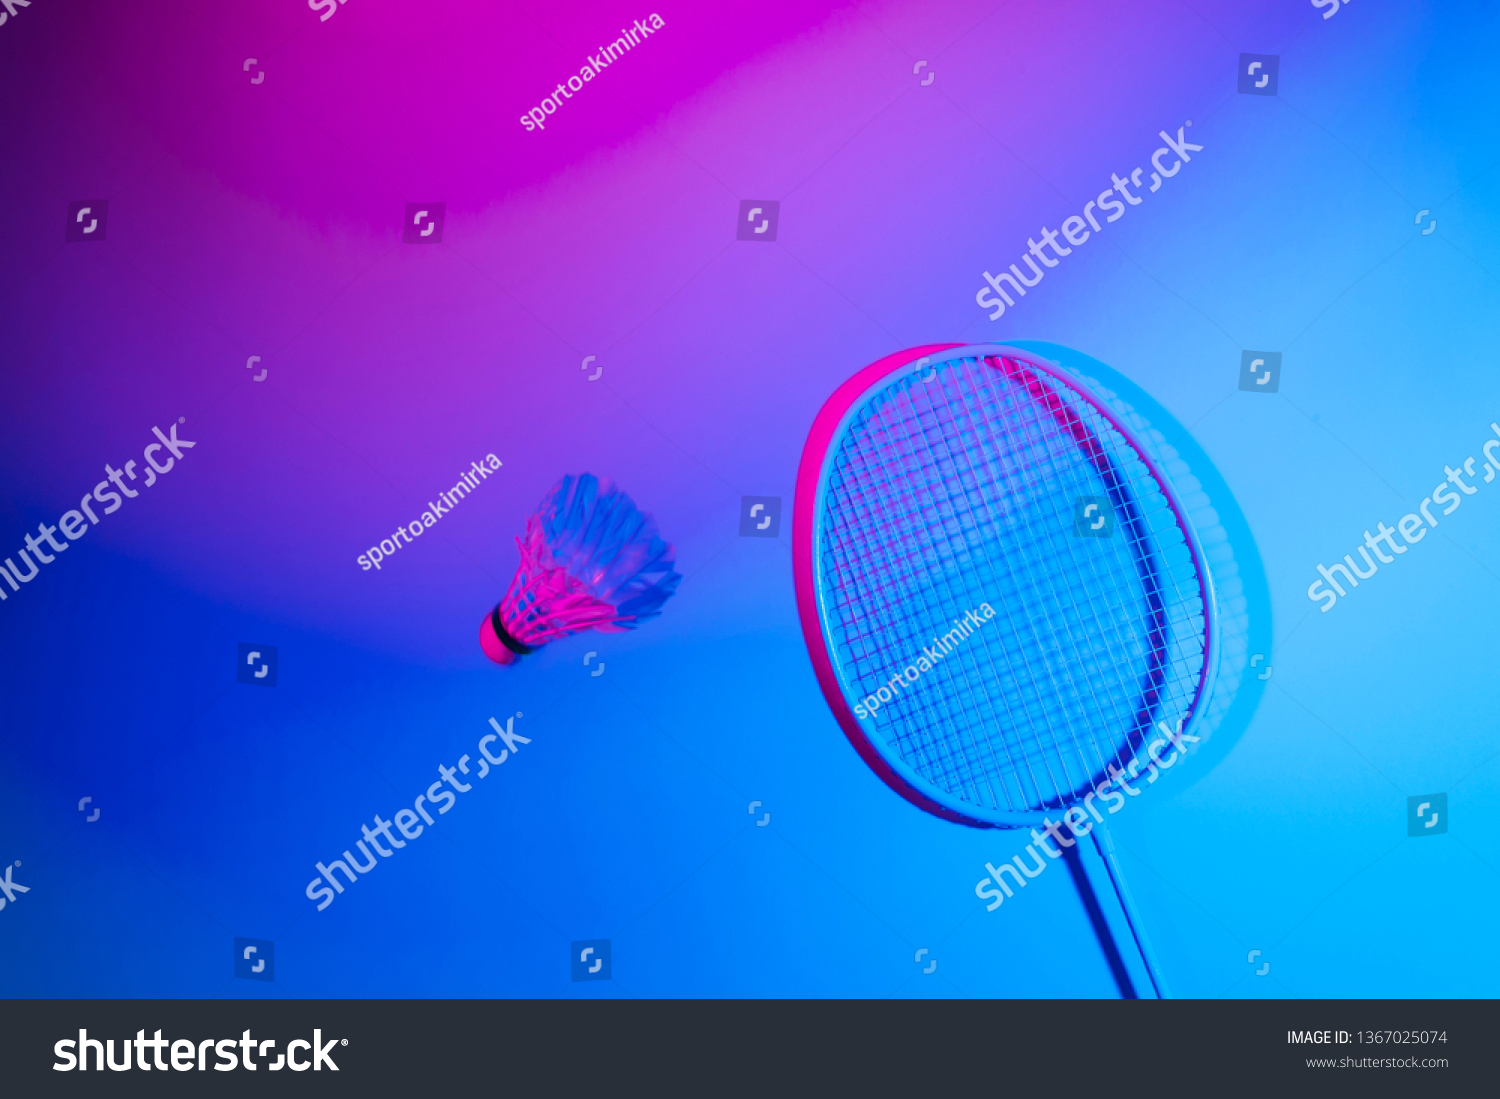 Badminton racket and shuttlecock in vibrant bold gradient holographic neon colors  #1367025074